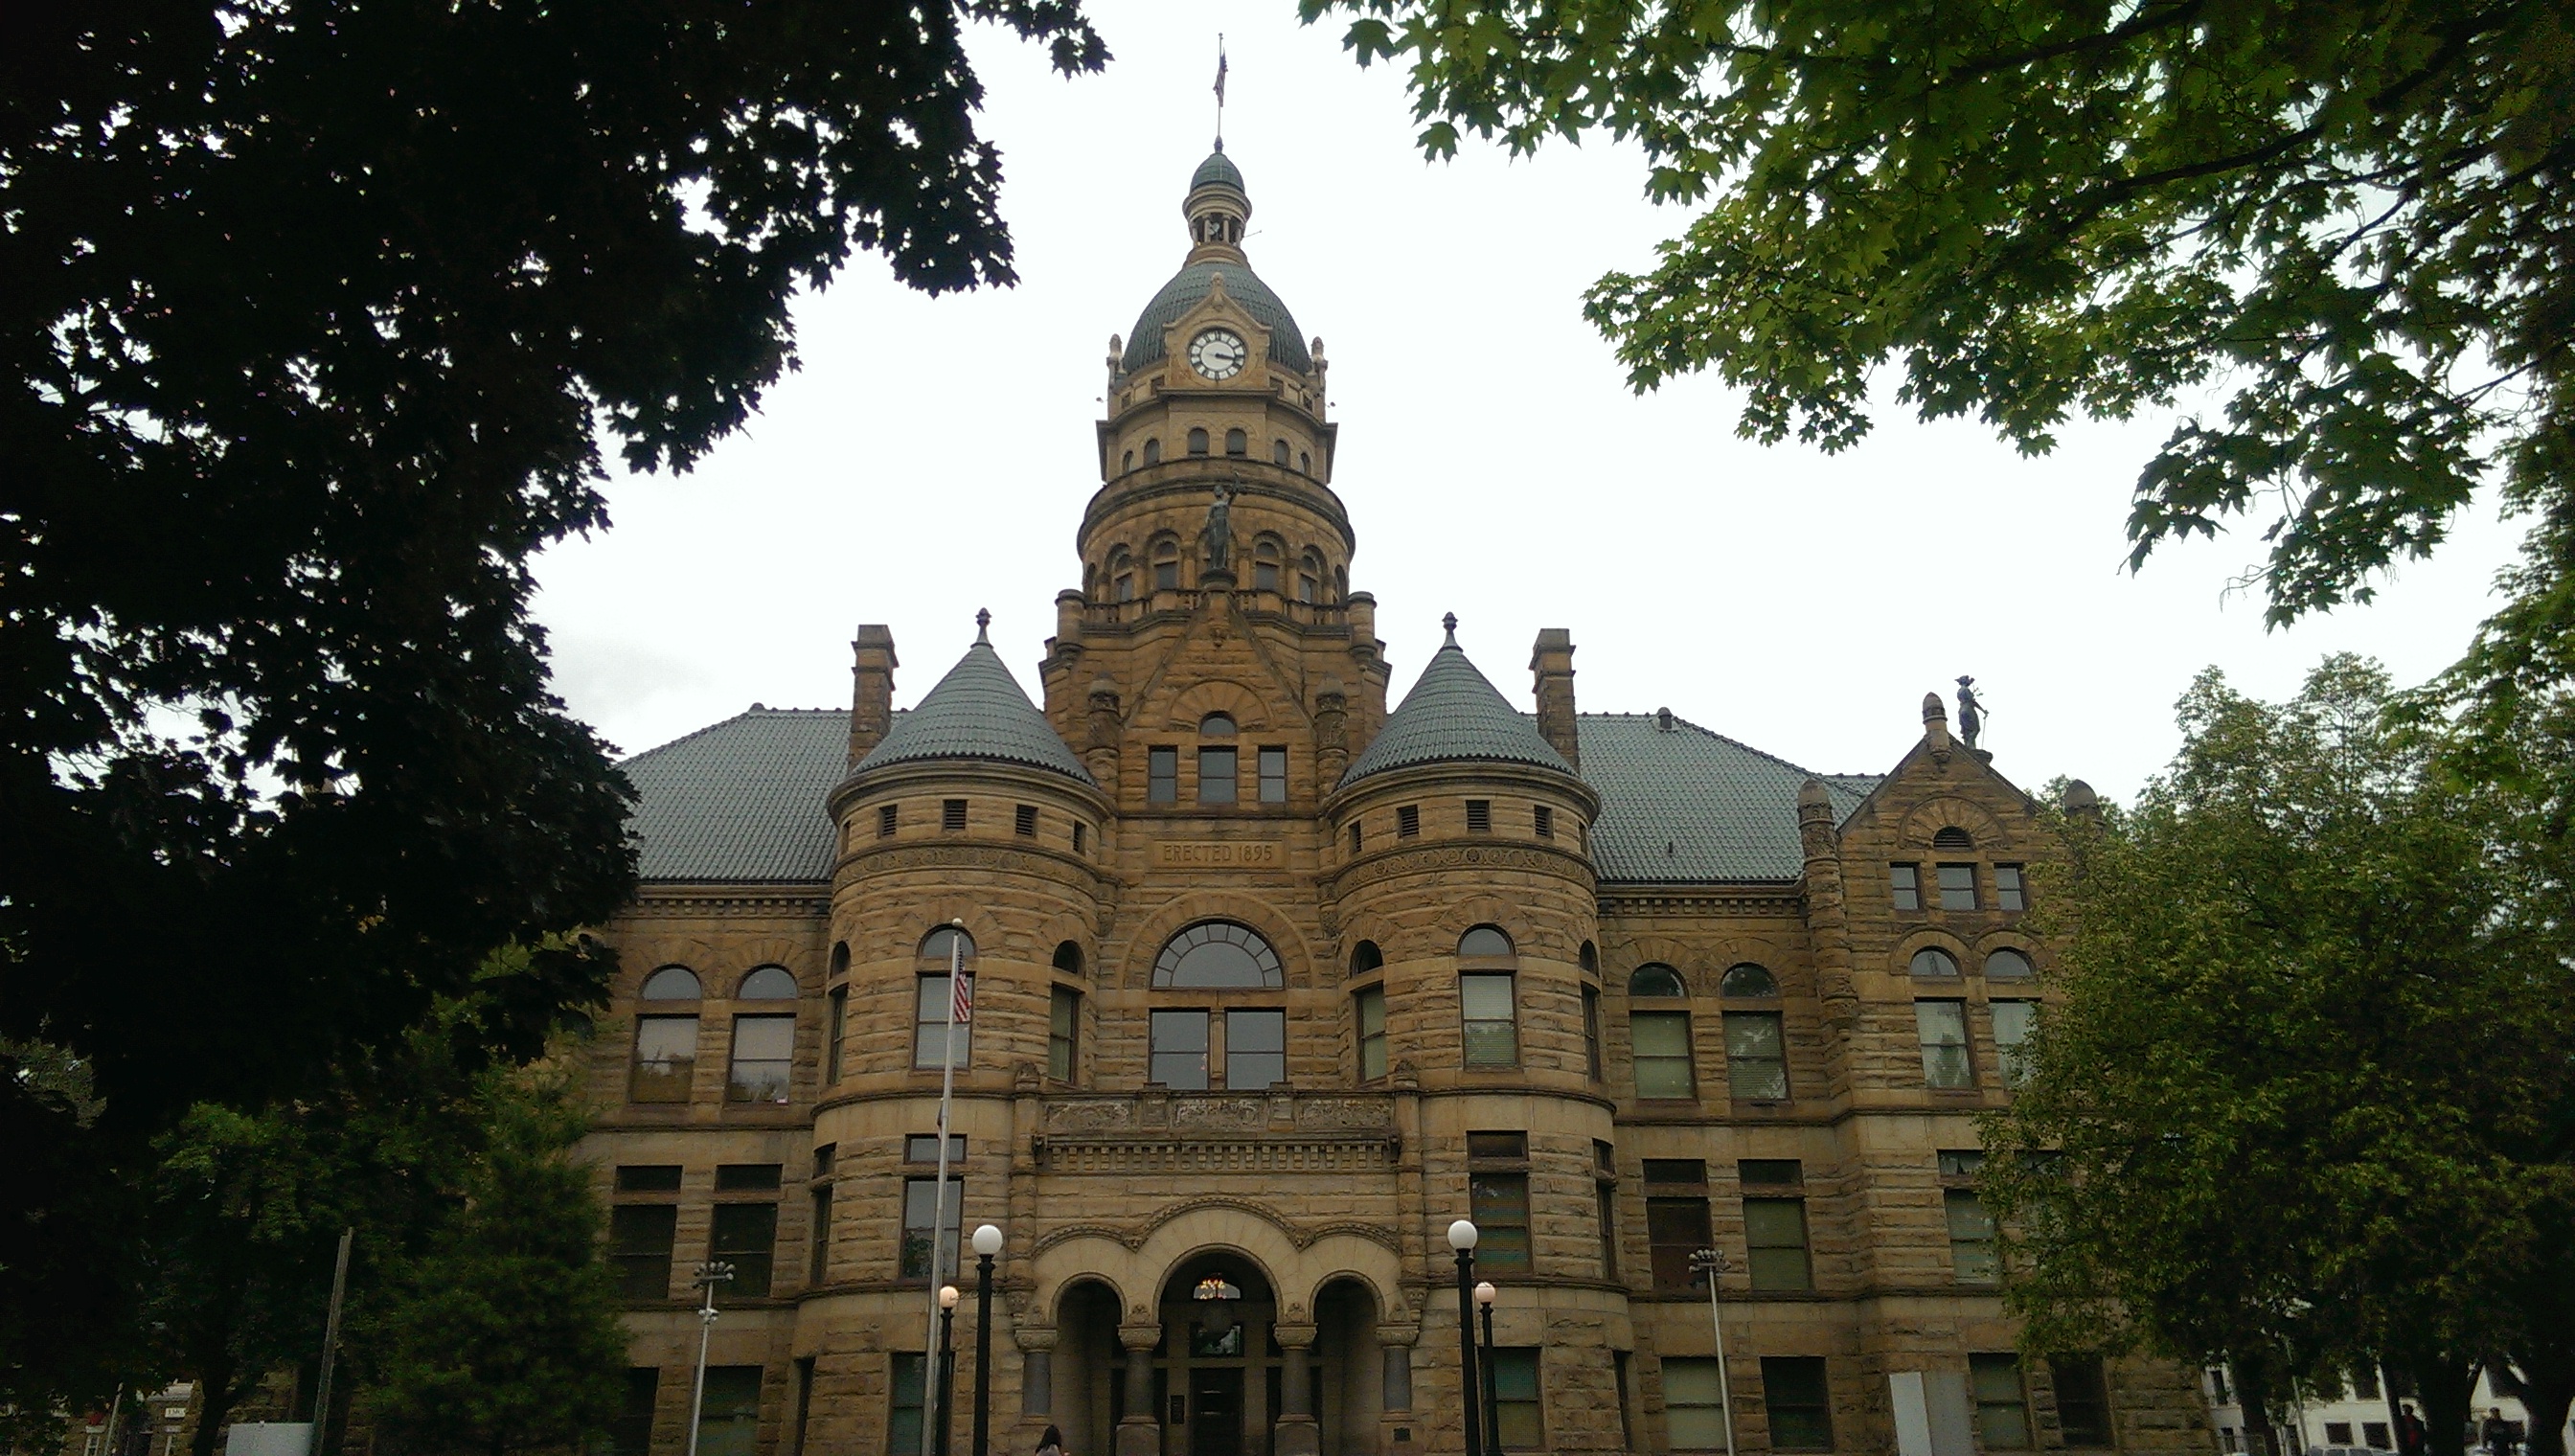 Trumbull County Courthouse - Copyright Serge Rumyantsev